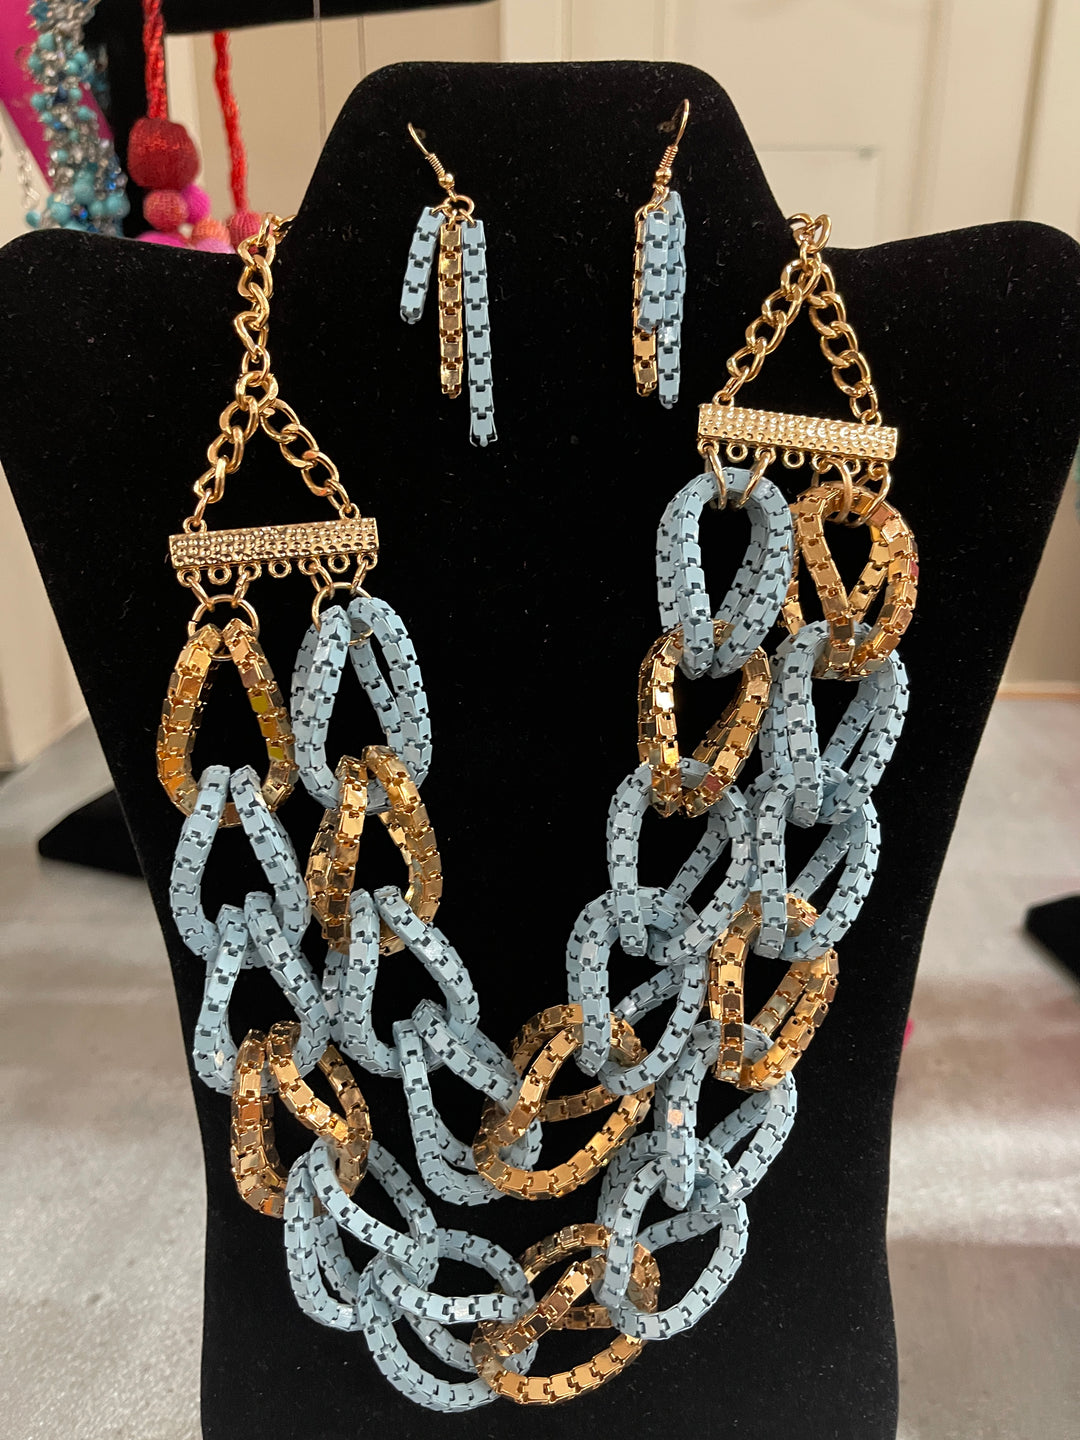 Stylish Twined chain necklace